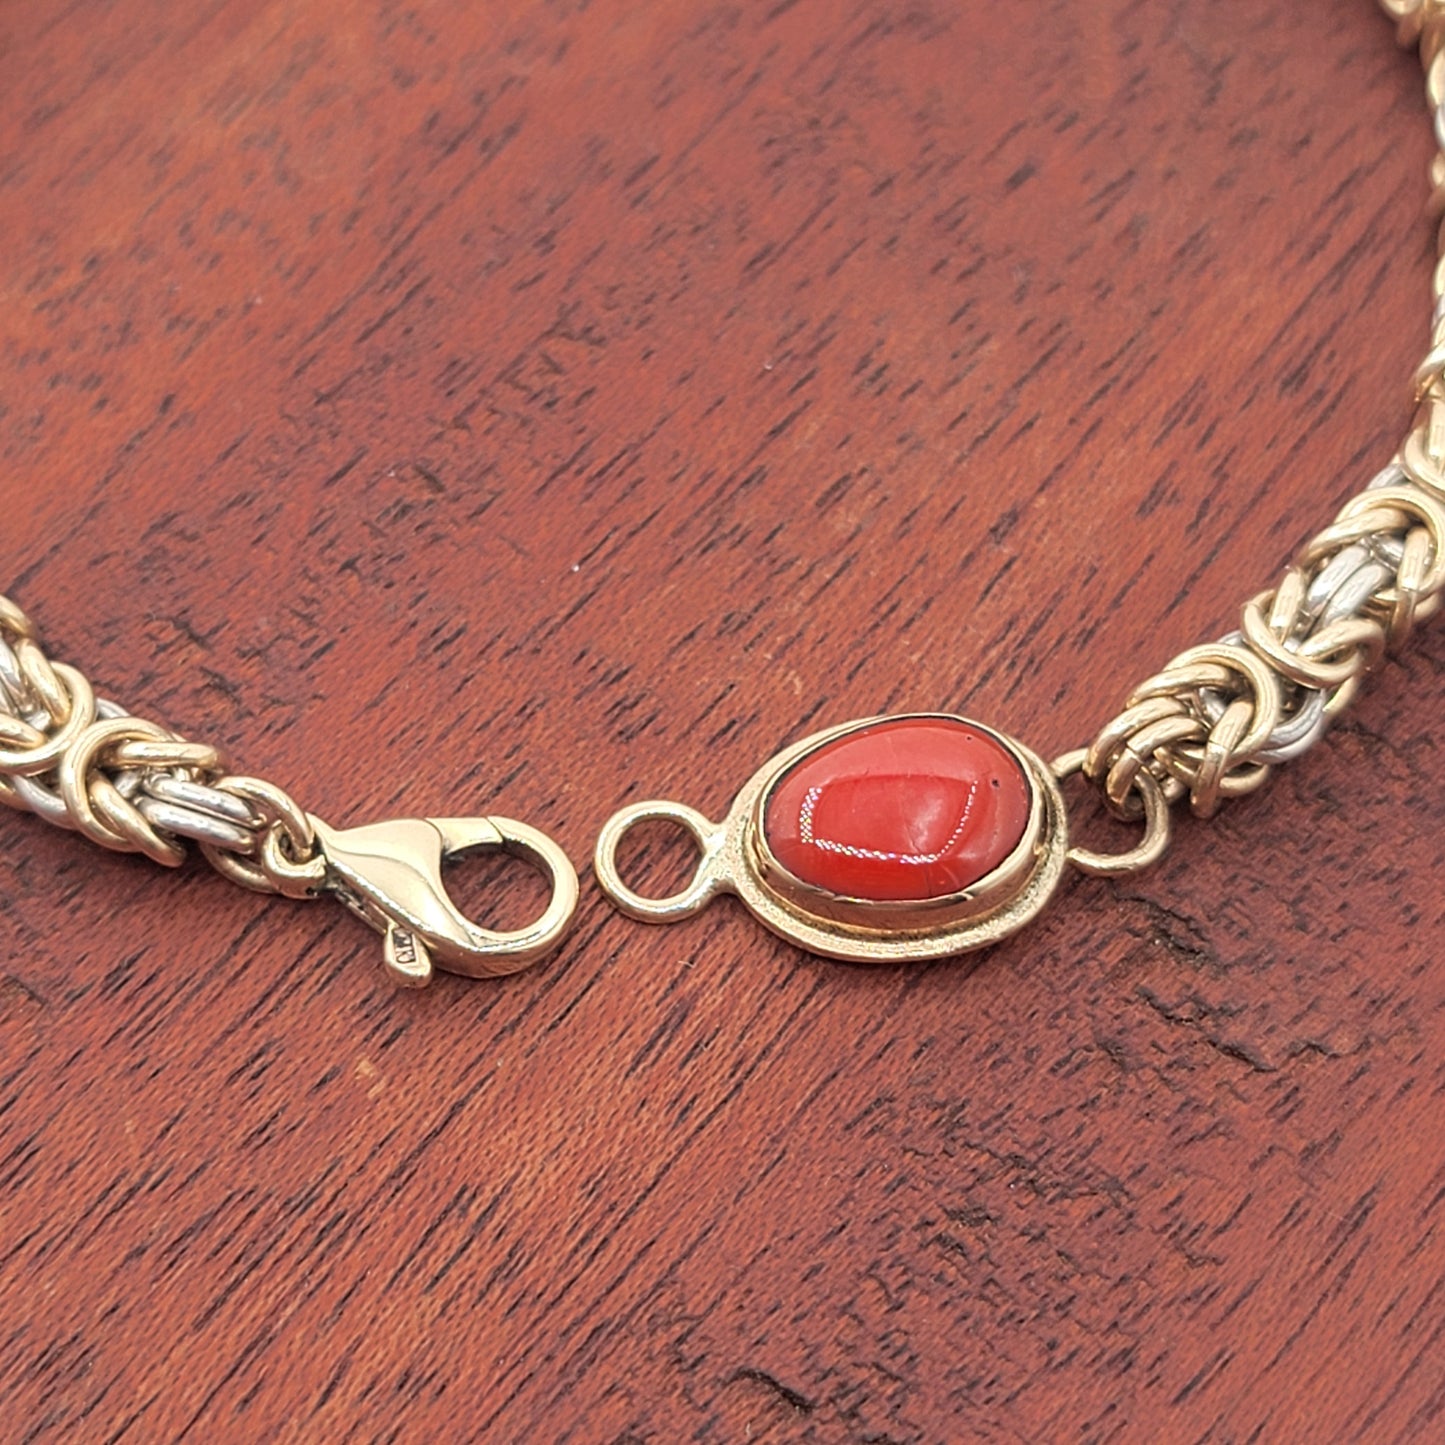 Small Silver and Gold Chain Bracelet with Coral